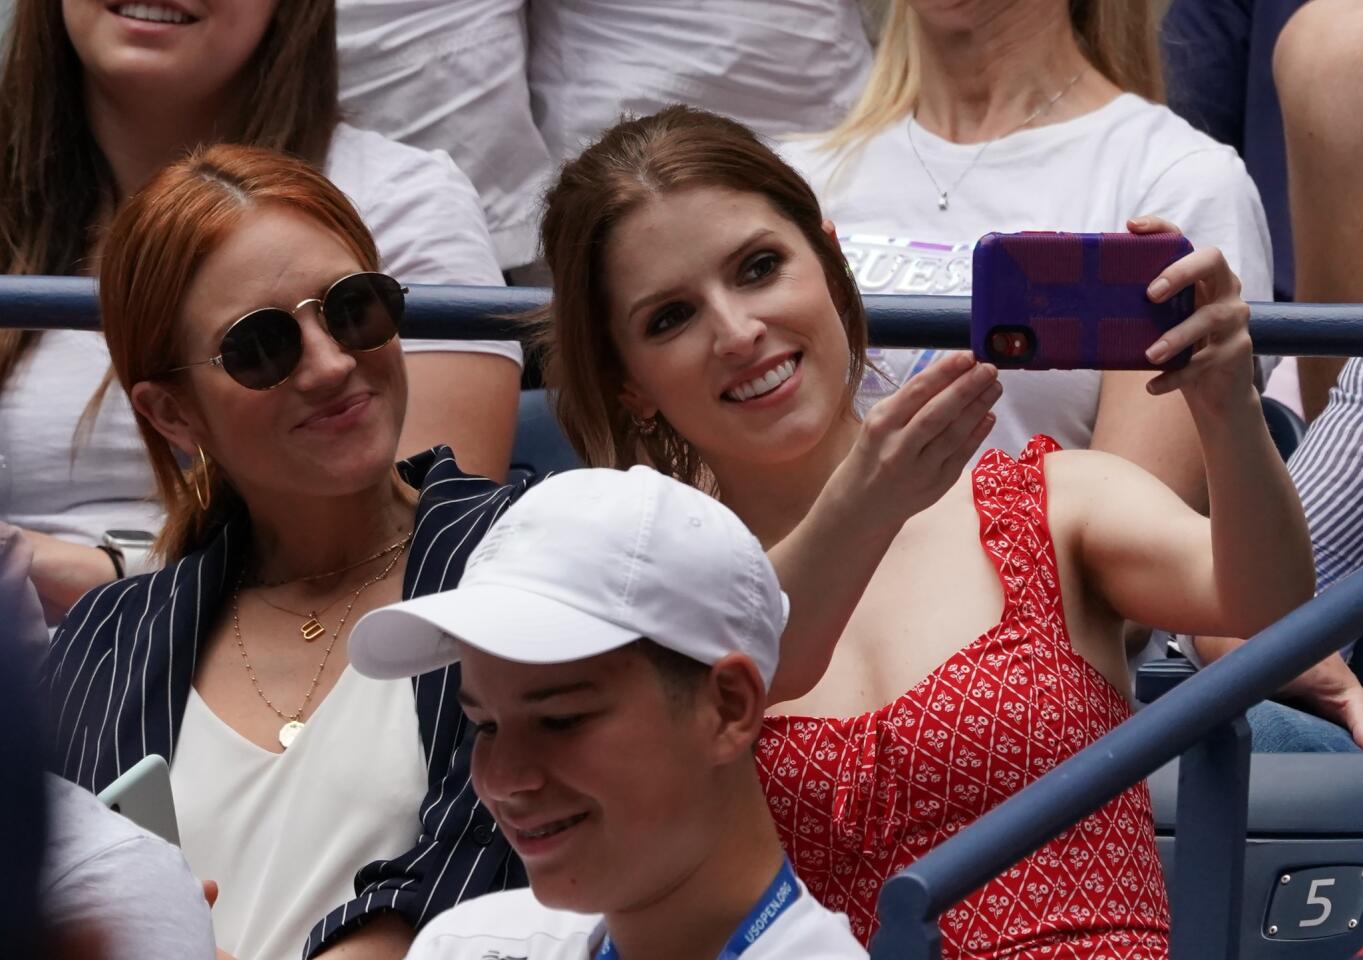 "Pitch Perfect" co-stars Brittany Snow and Anna Kendrick takes a selfie as they watch Serena Williams of the U.S. against Petra Martic of Croatia during their Round Four Women's Singles match at the 2019 U.S. Open at the USTA Billie Jean King National Tennis Center in New York on Sept. 1, 2019.